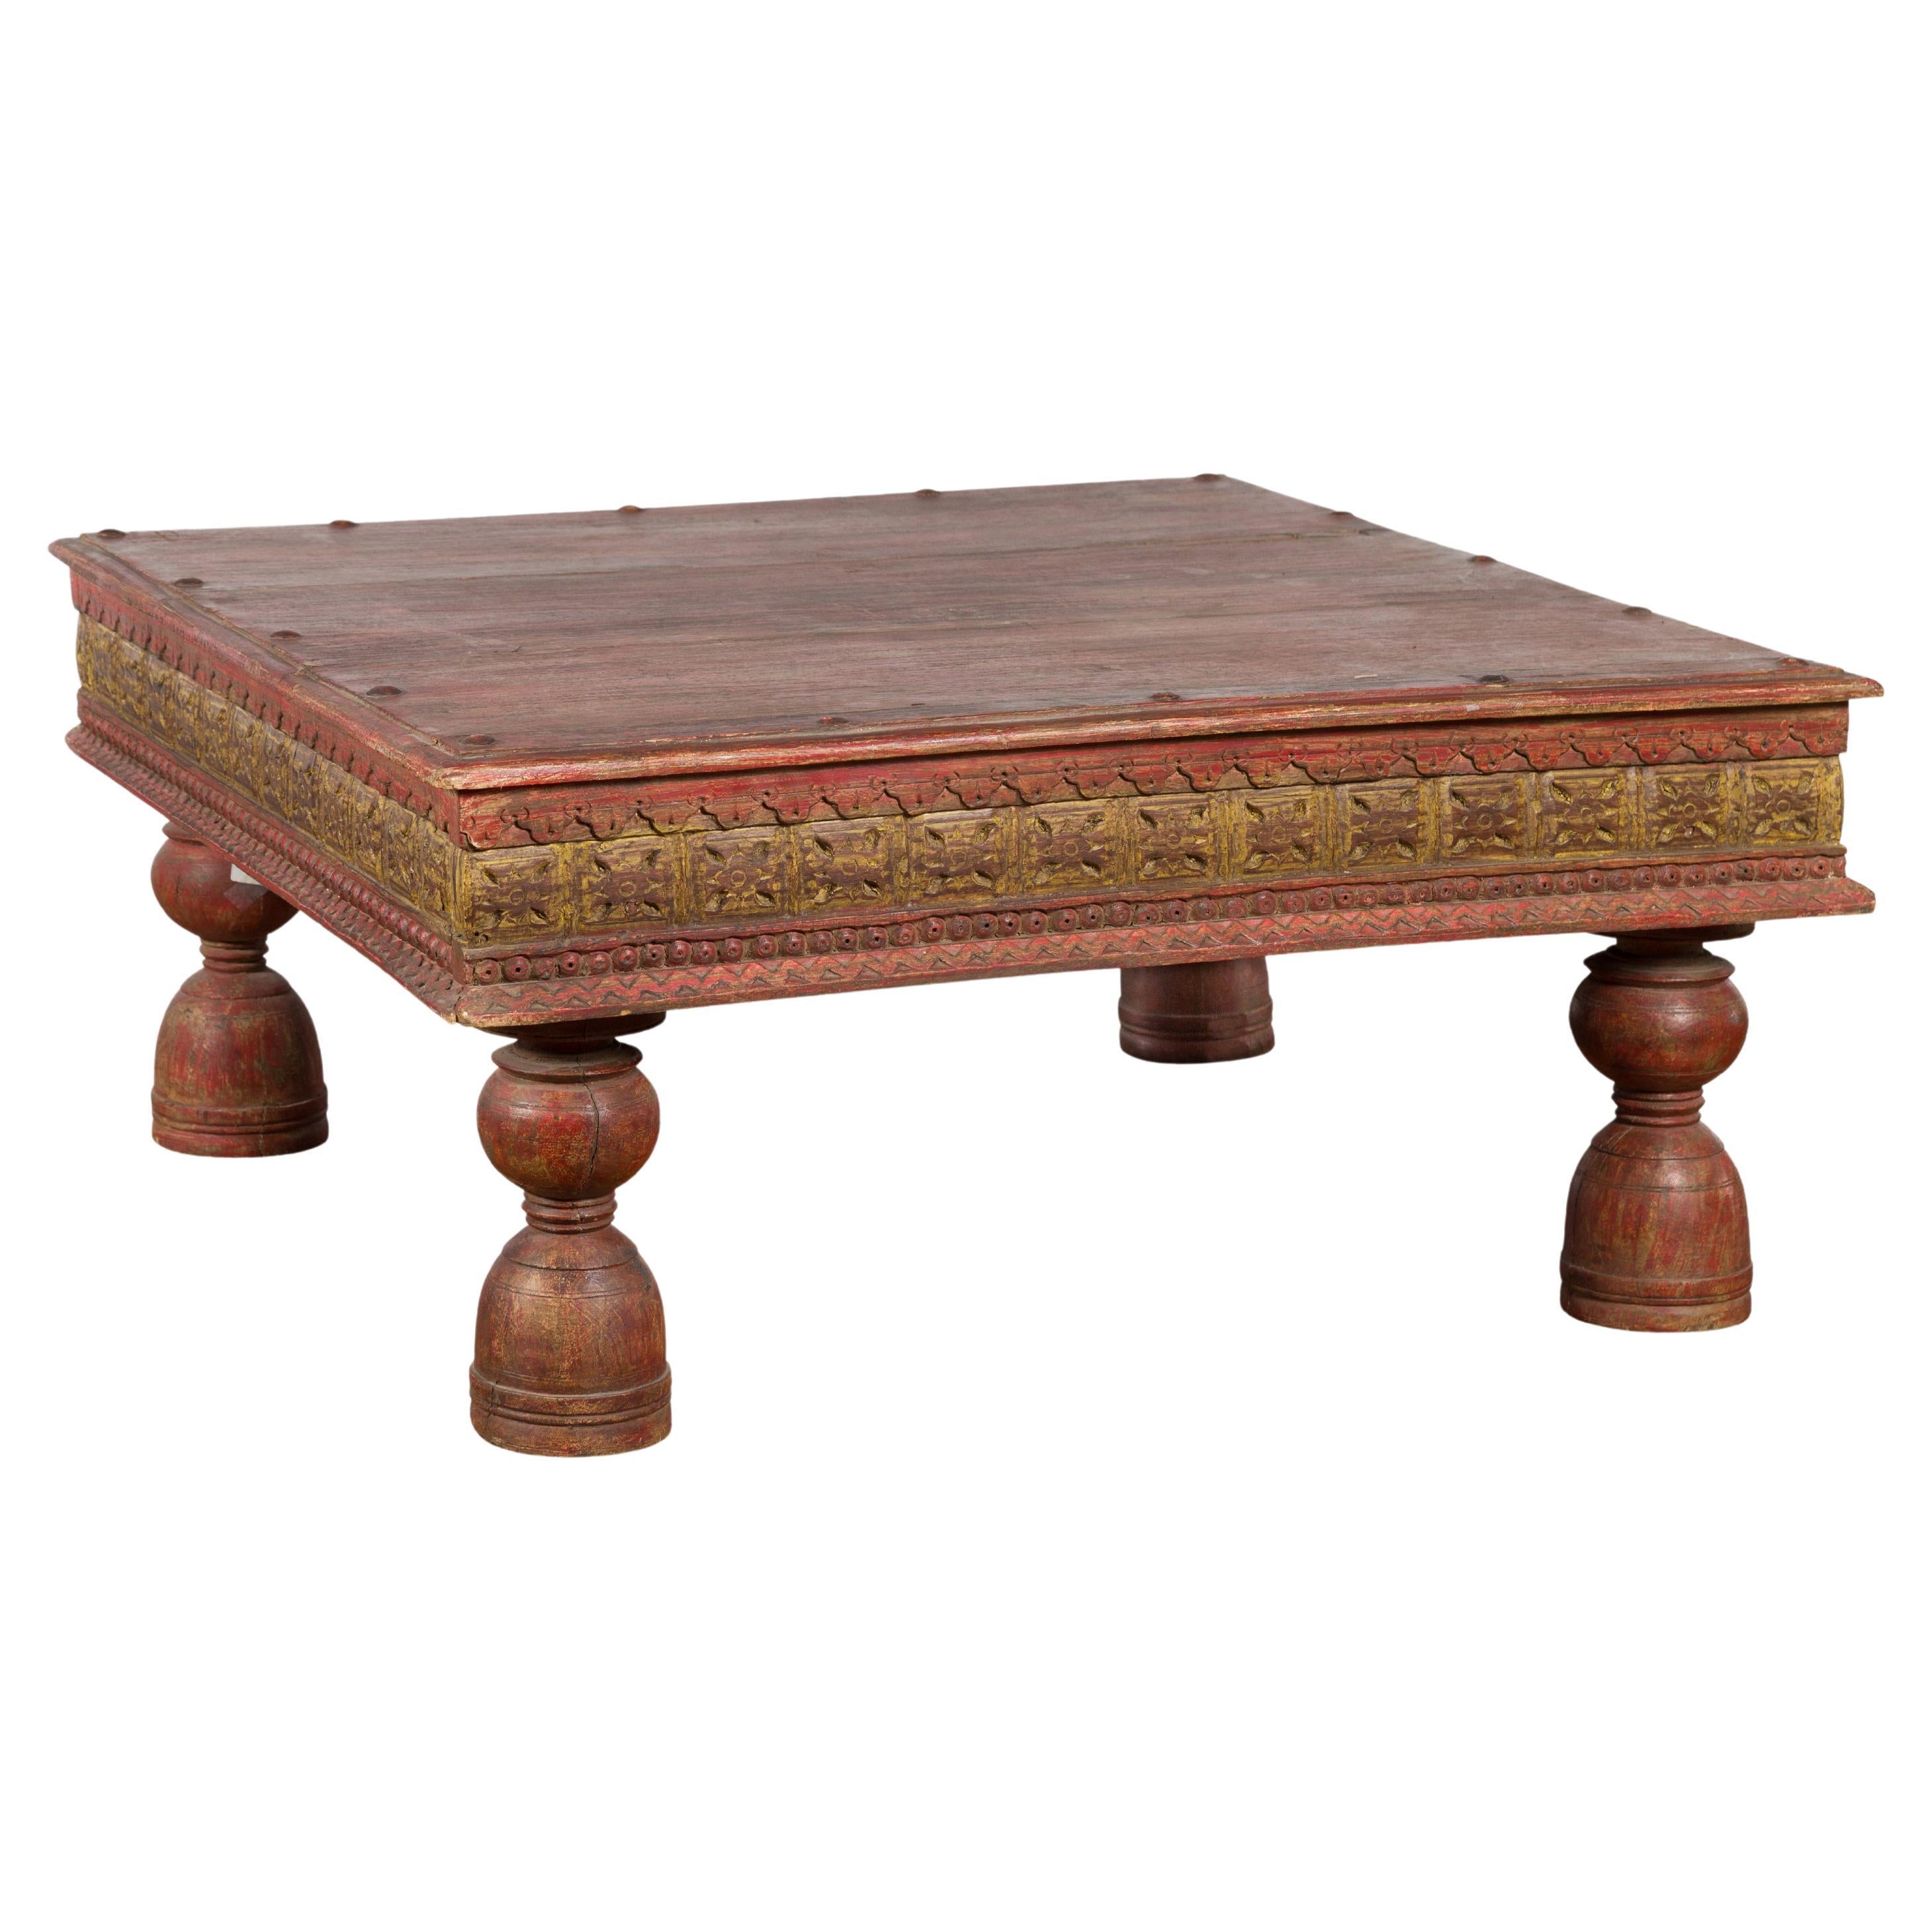 Indian Primitive Low Carved Wooden Coffee Table with Polychrome Accents